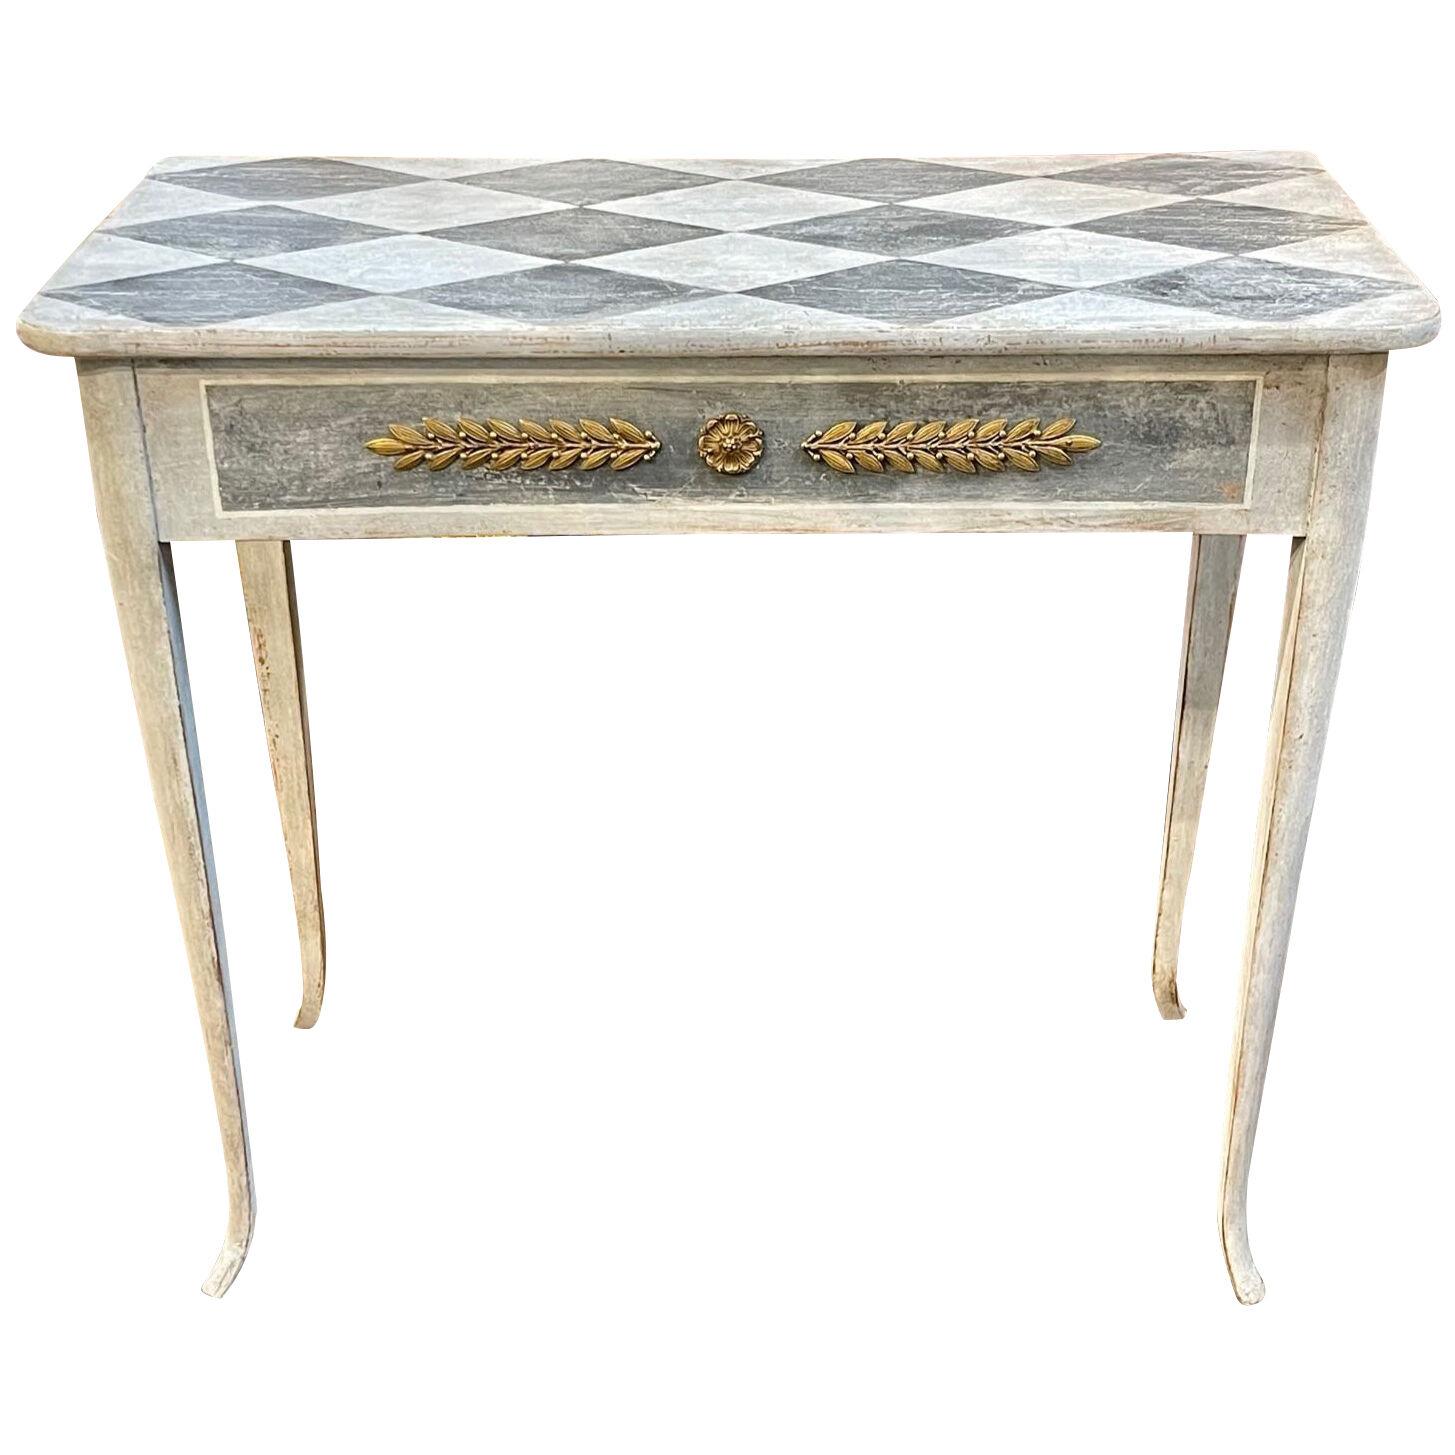 Swedish Neo-Classical Painted Console